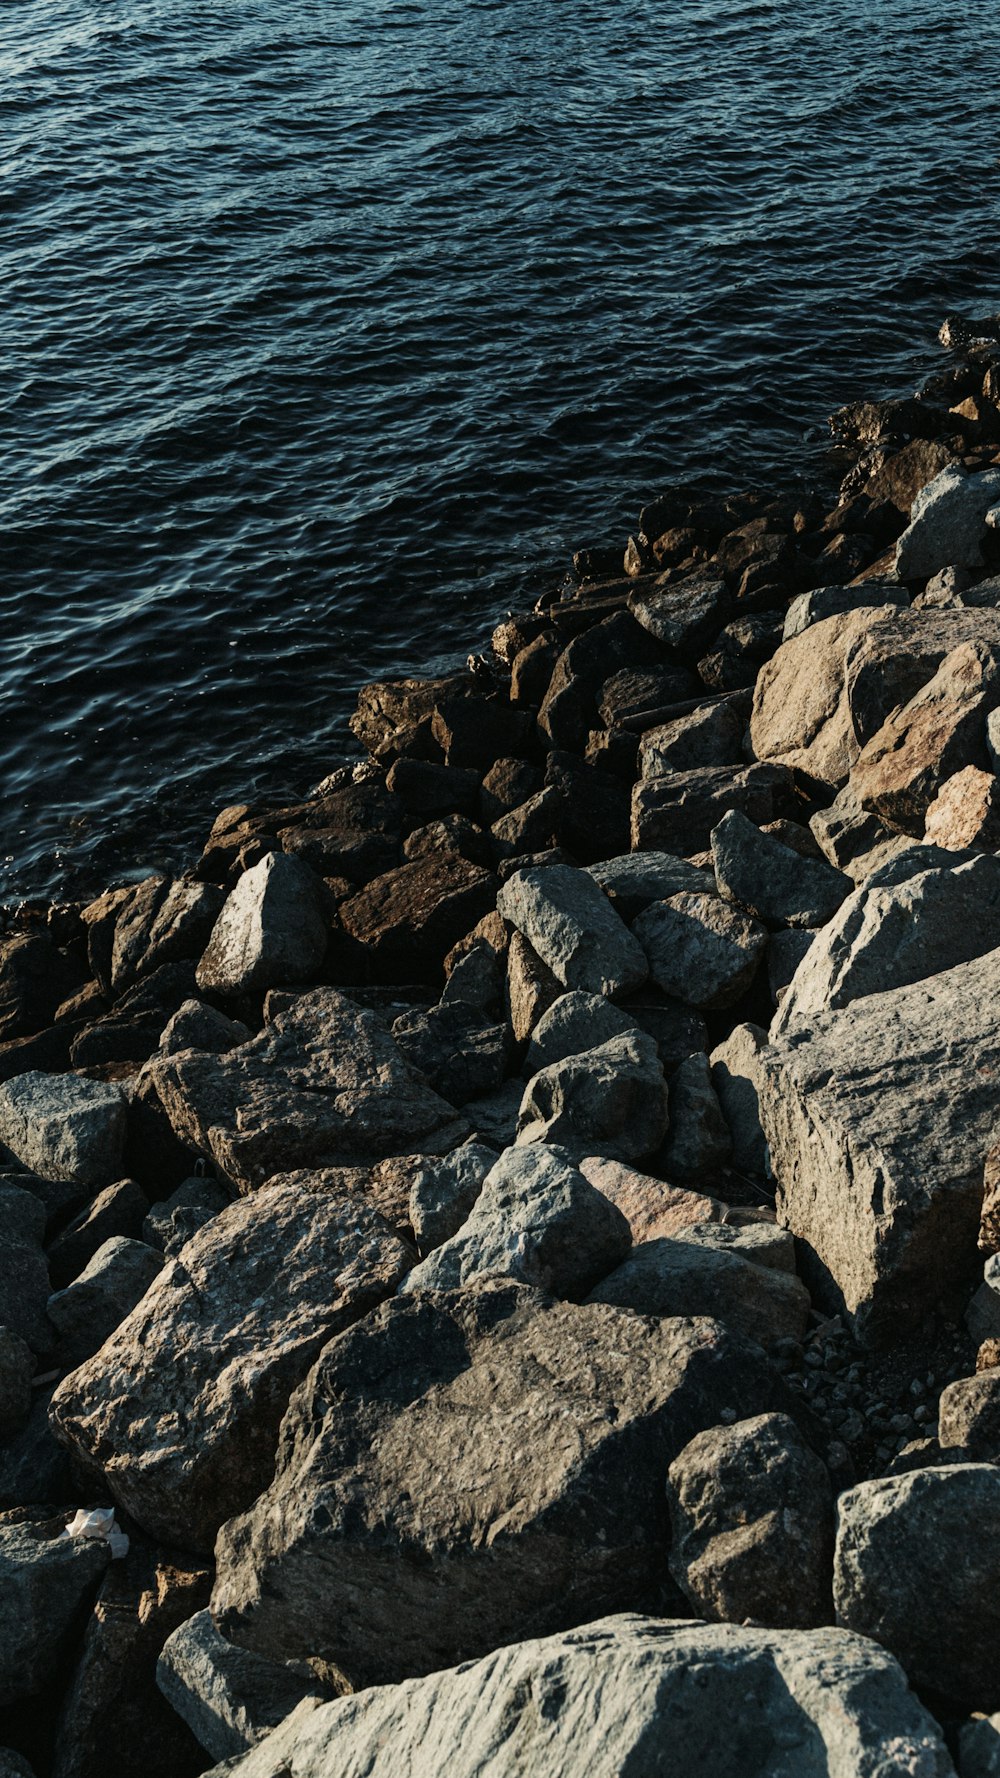 a bird is sitting on the rocks by the water